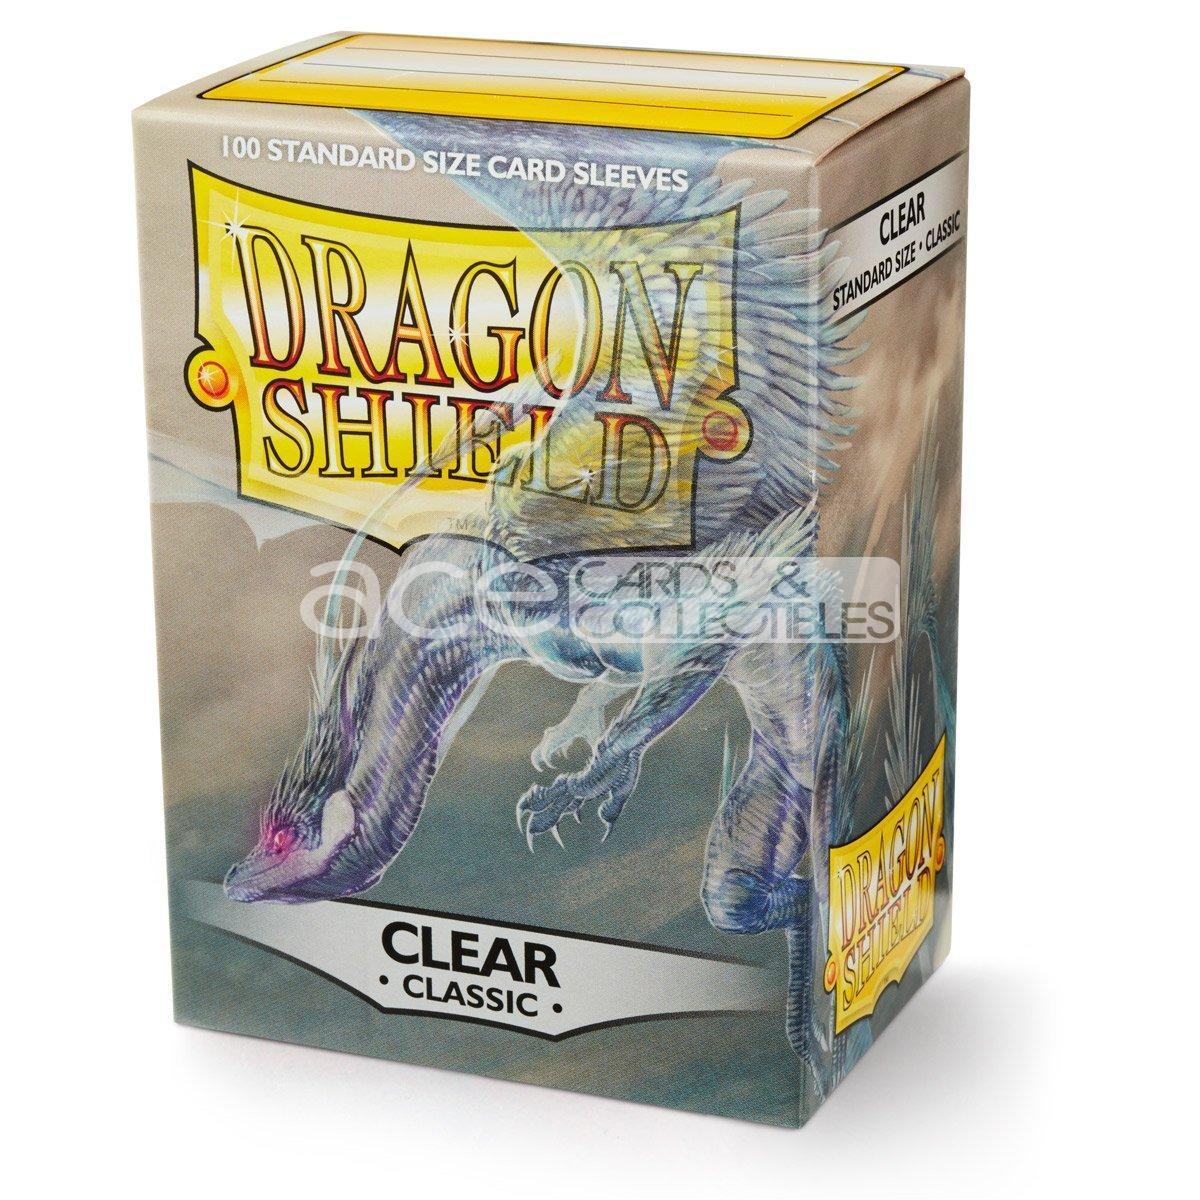 Dragon Shield Sleeve Standard Size 100pcs ( Clear Classic )-Dragon Shield-Ace Cards &amp; Collectibles